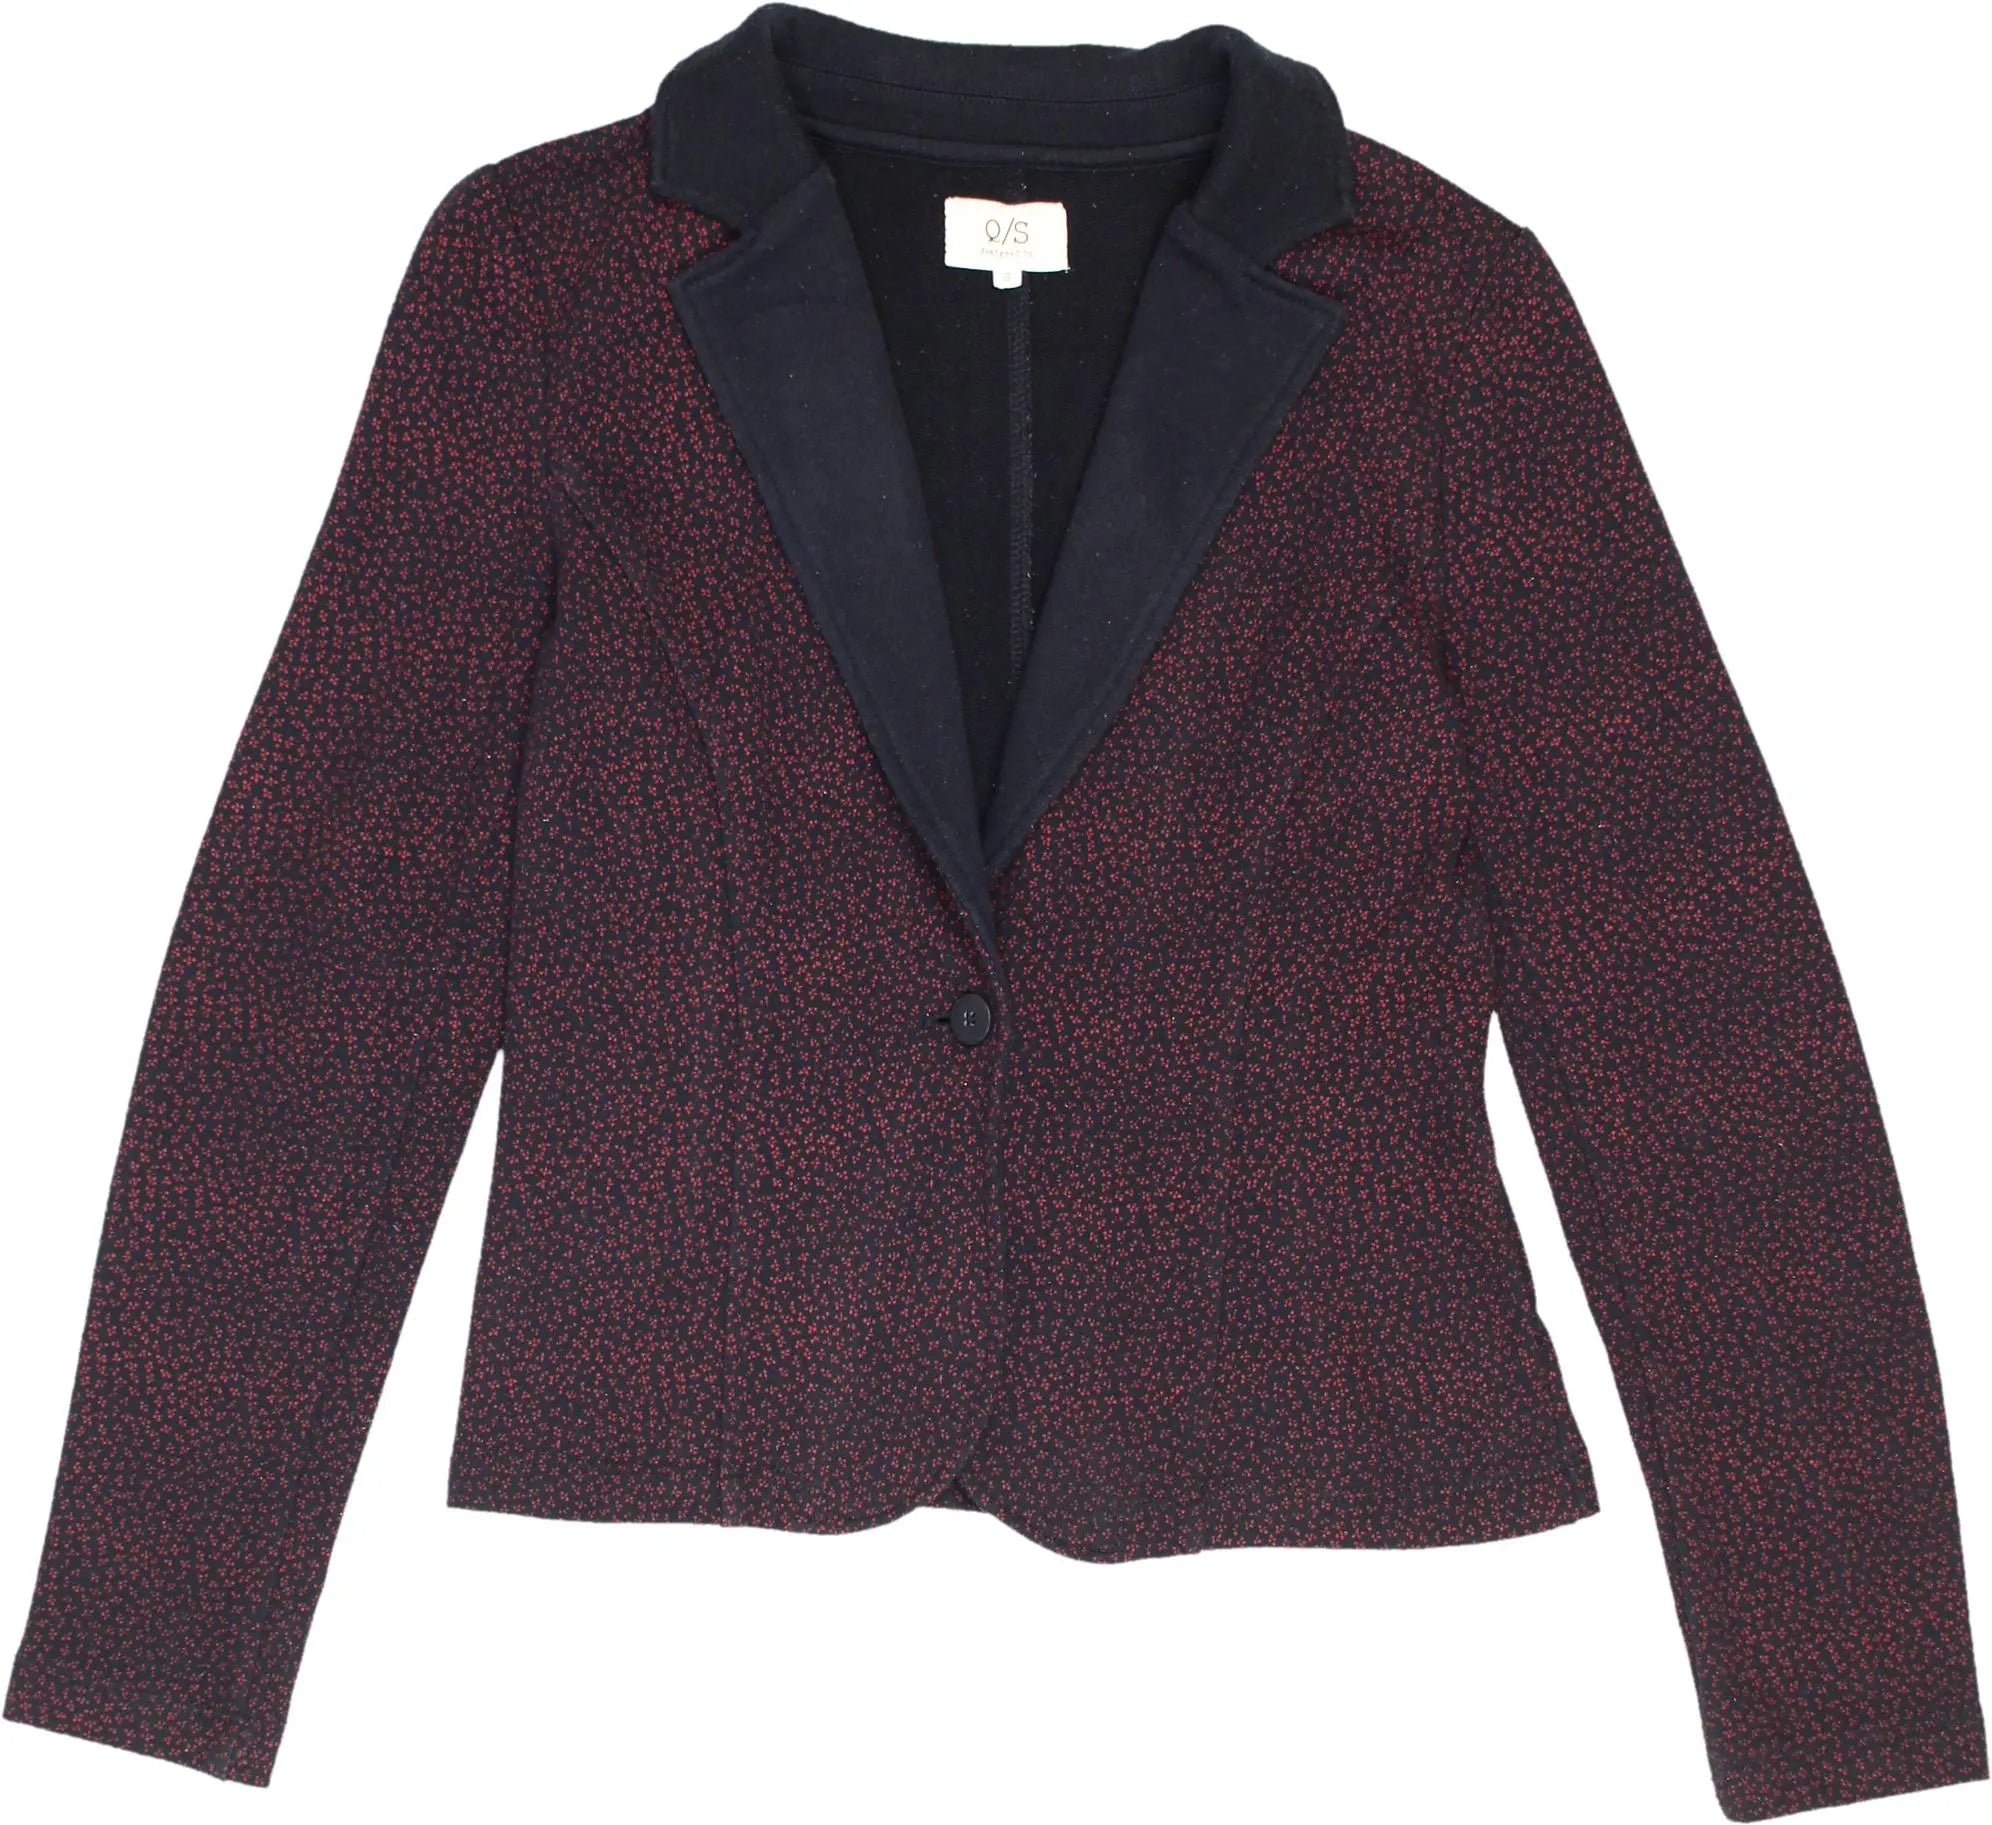 Q/S - Blazer- ThriftTale.com - Vintage and second handclothing